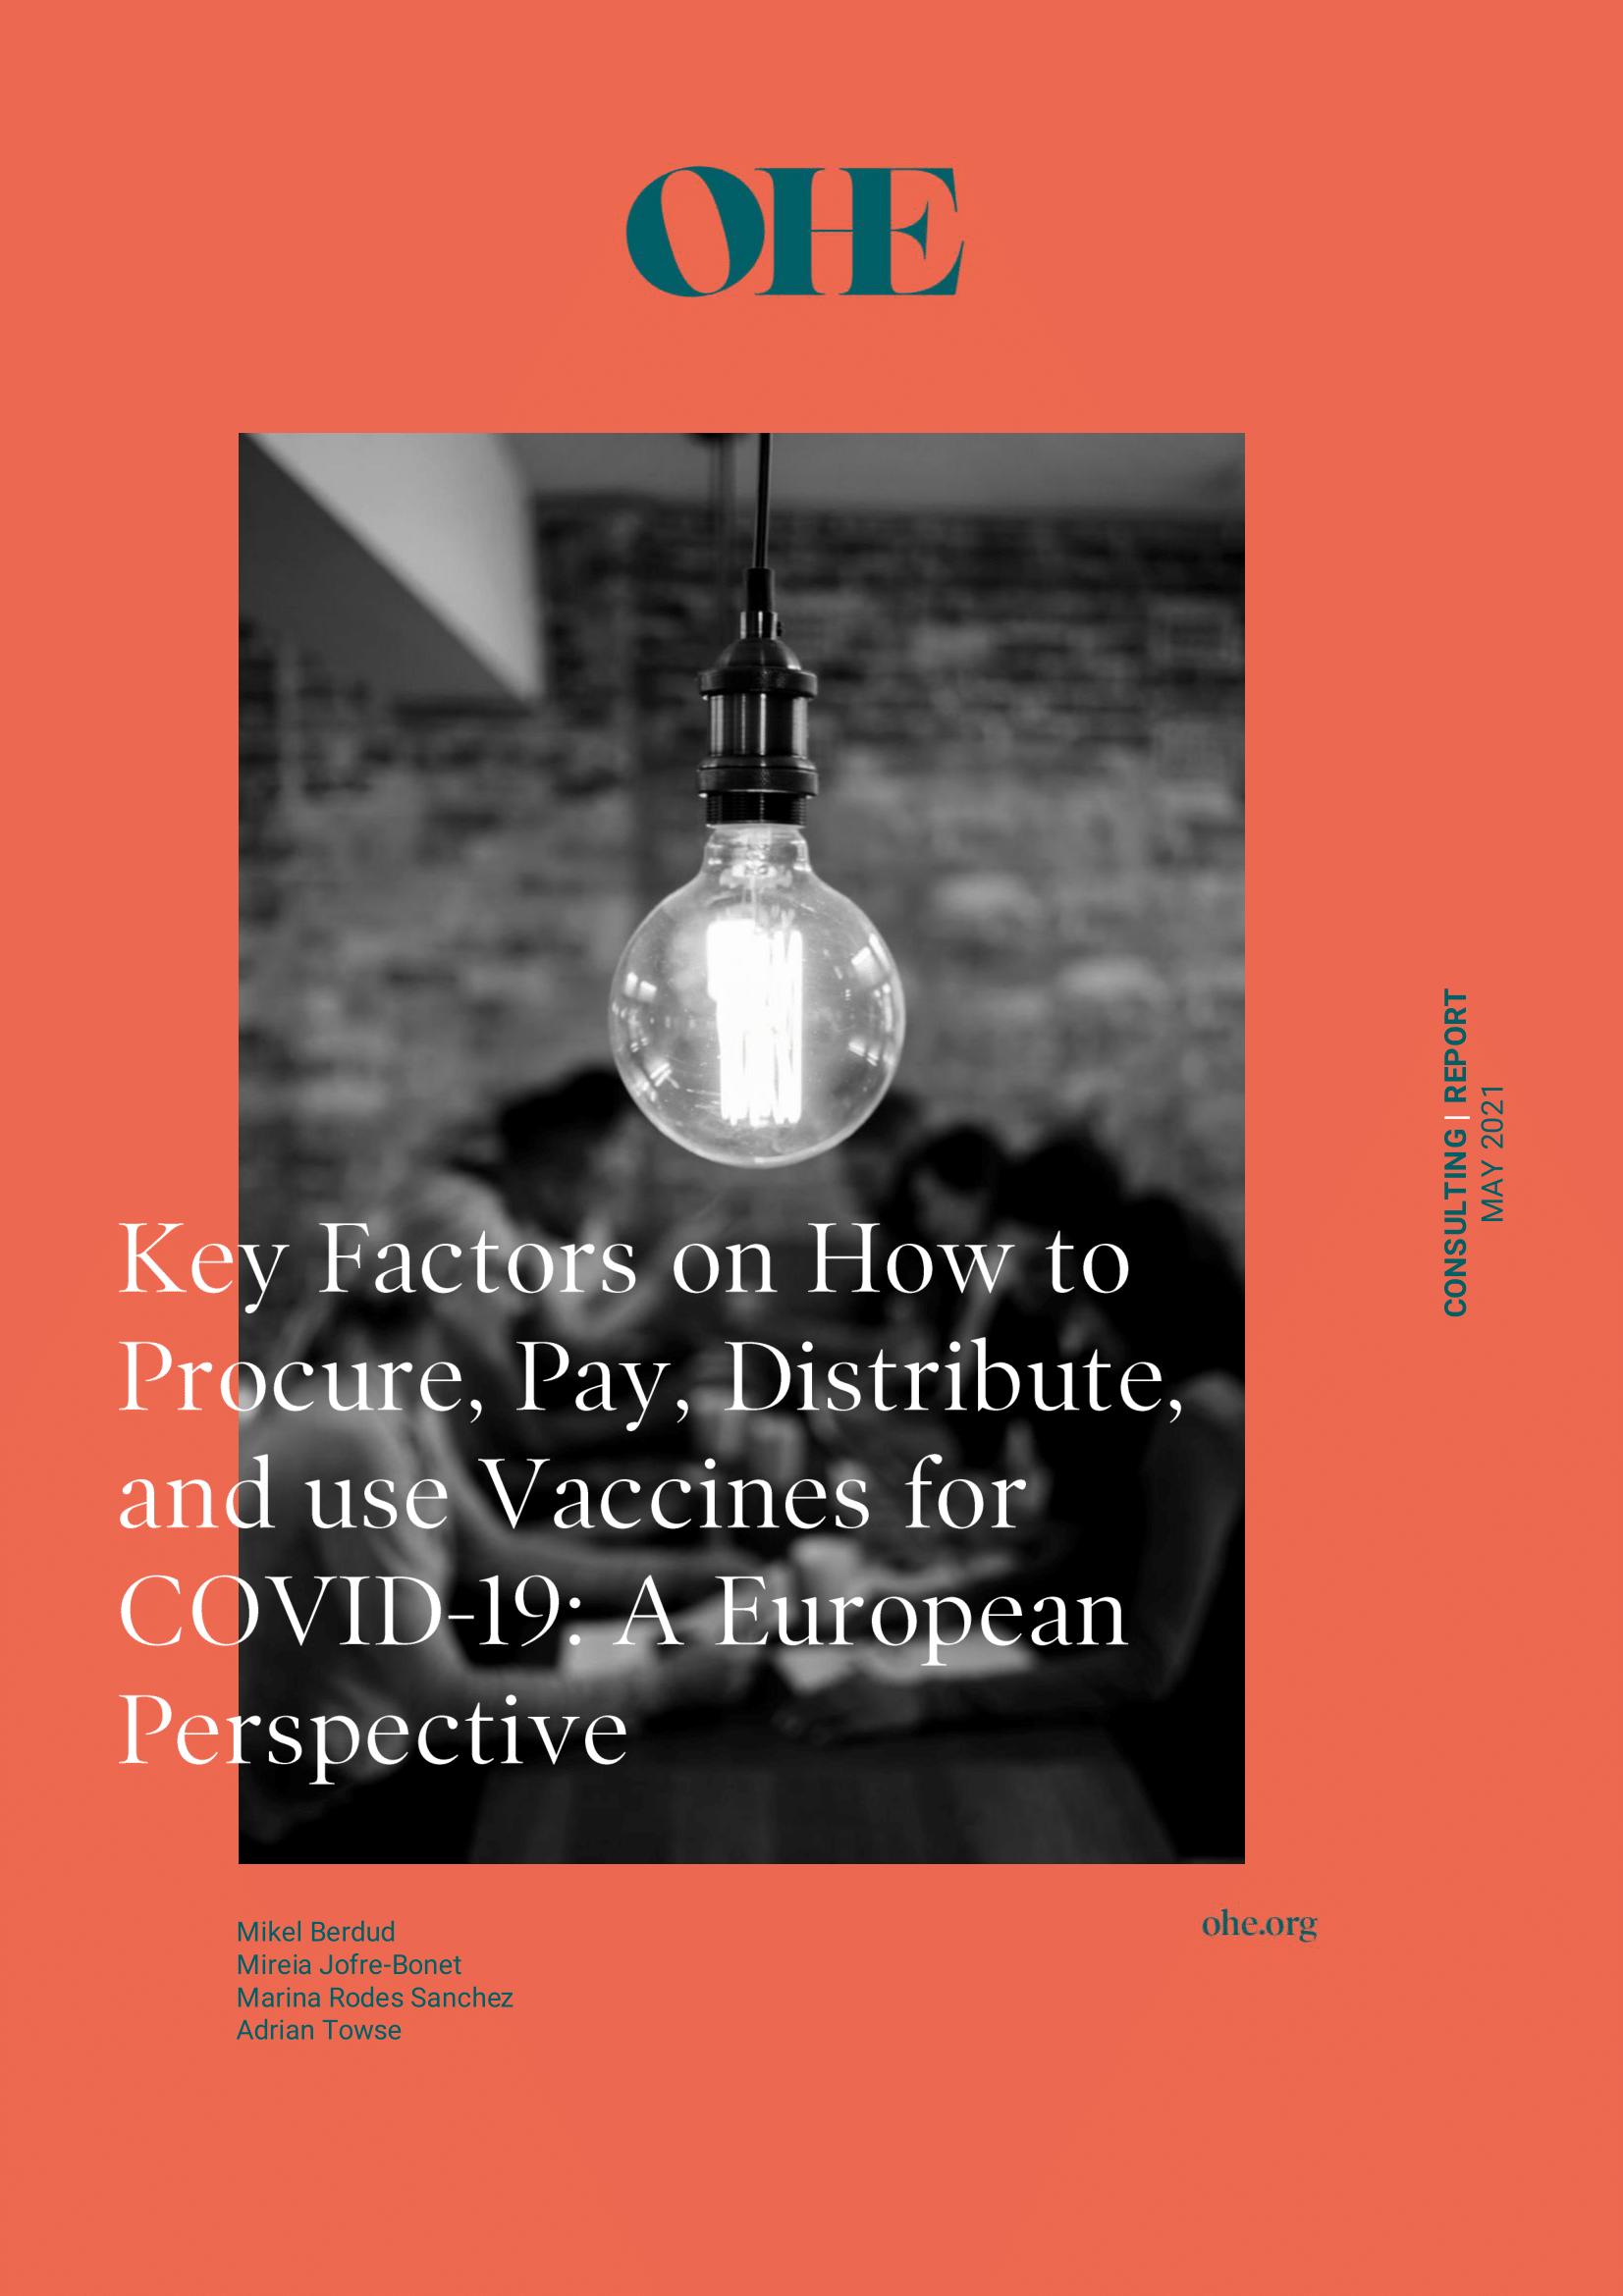 Key Factors on How to Procure, Pay, Distribute and Use Vaccines for COVID-19: A European Perspective